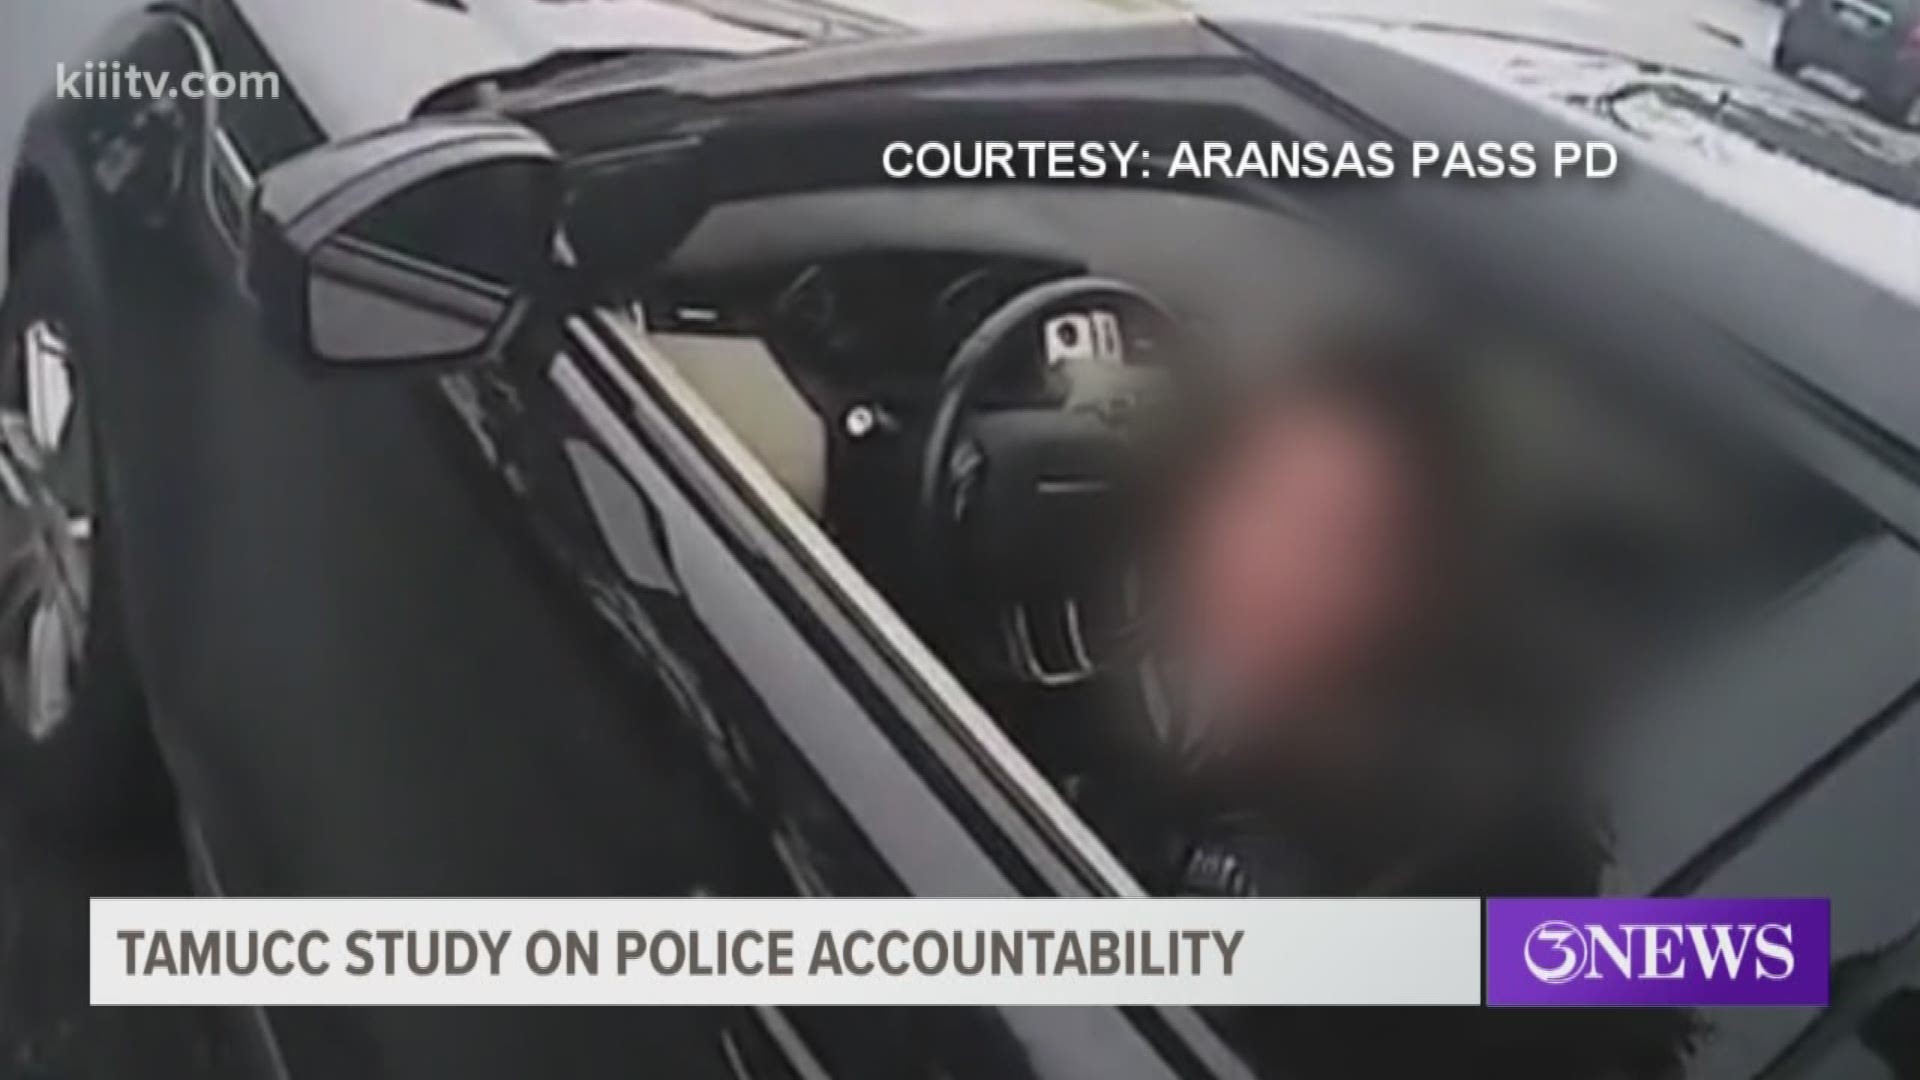 Body cams are used to settle disputes on what exactly happened between an officer and the public to reduce complaints against police.